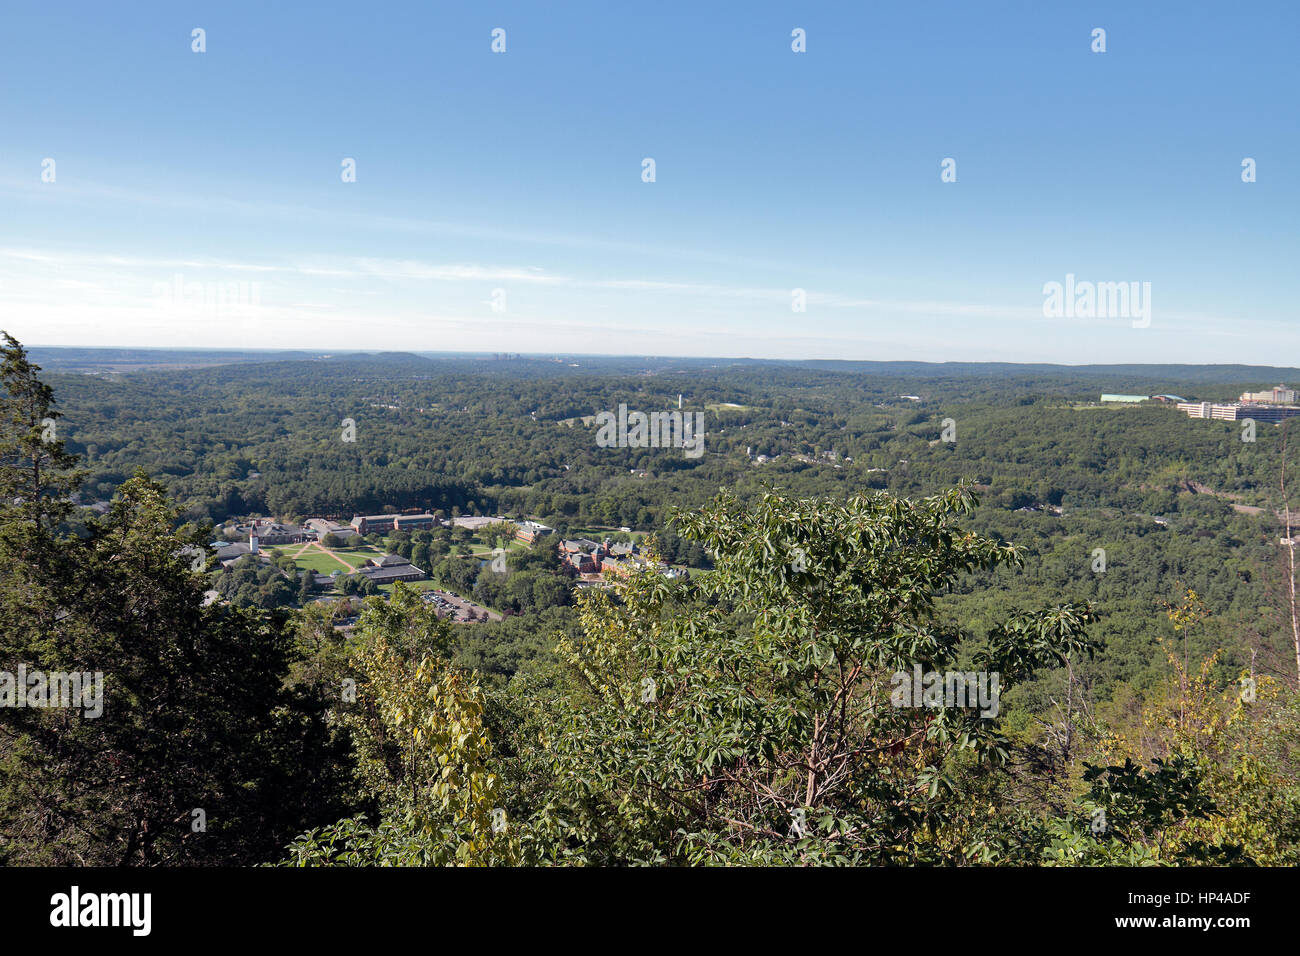 View towards Quinnipiac University from the Sleeping Giant (also known as Mount Carmel) State Park, close to Ne Stock Photo